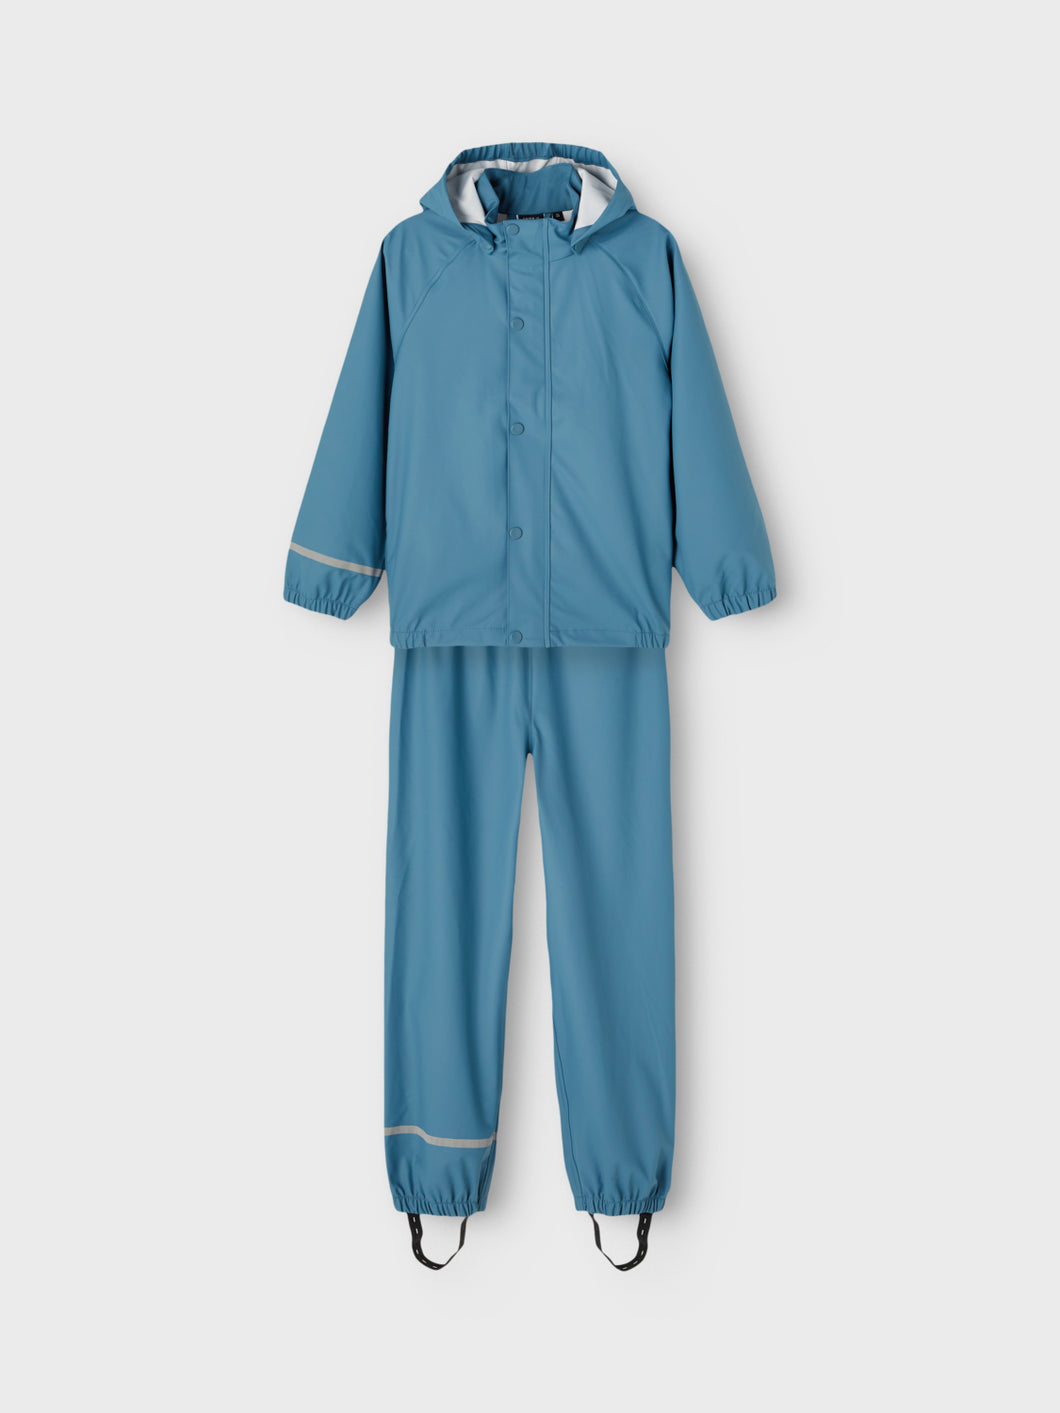 NKNDRY Outerwear - Real Teal